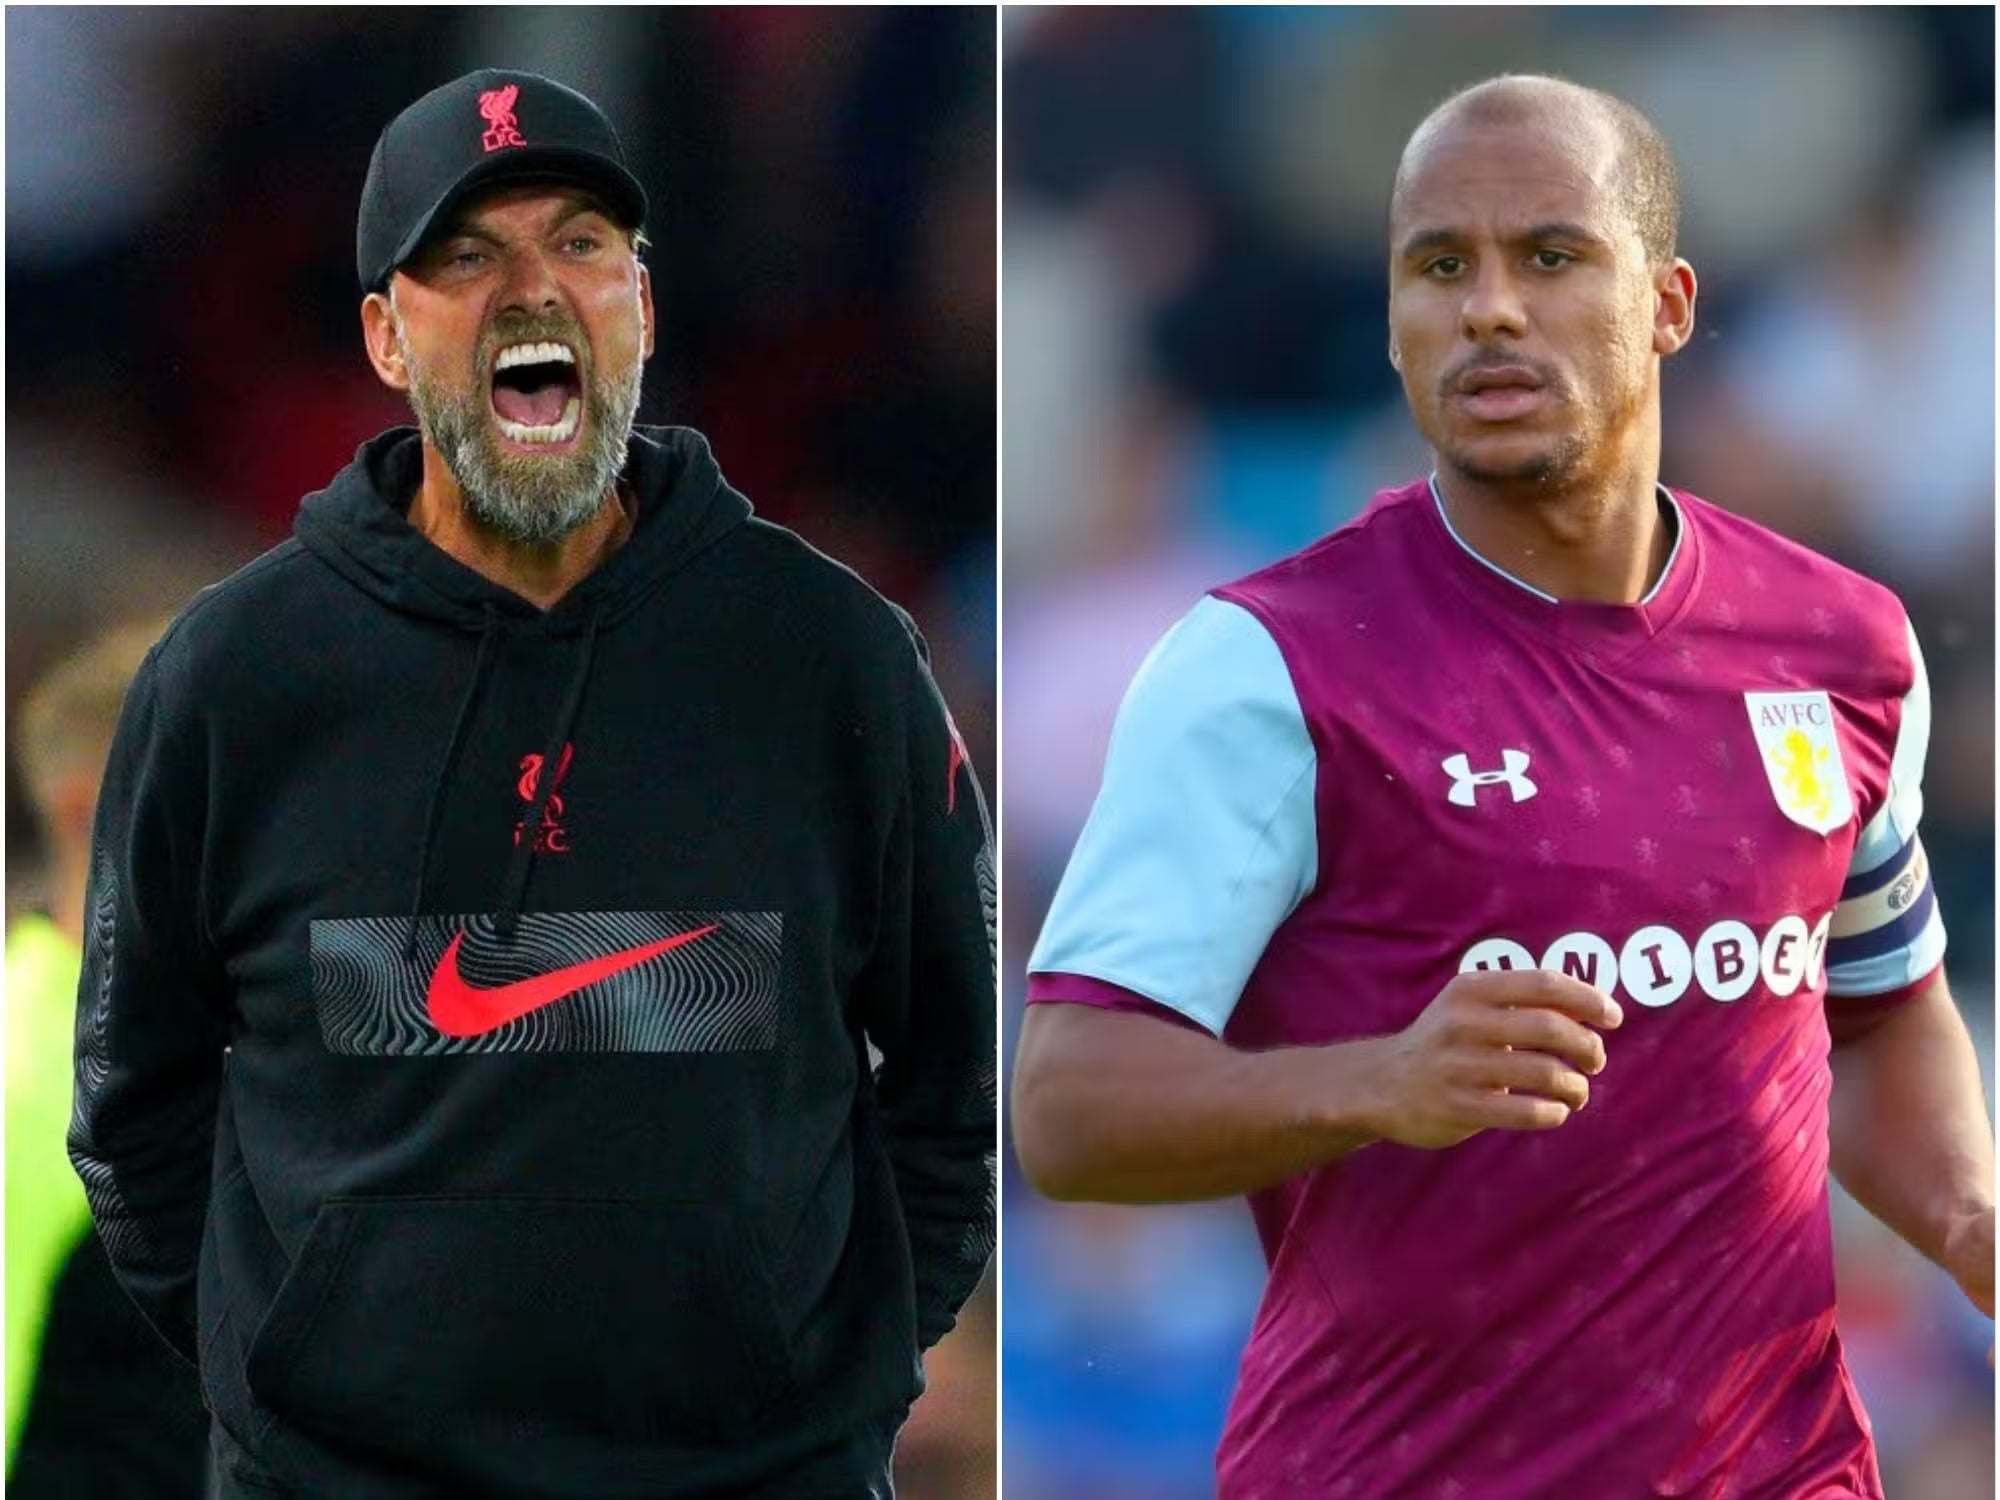 Jurgen Klopp and Gabriel Agbonlahor have entered an unlikely war of words